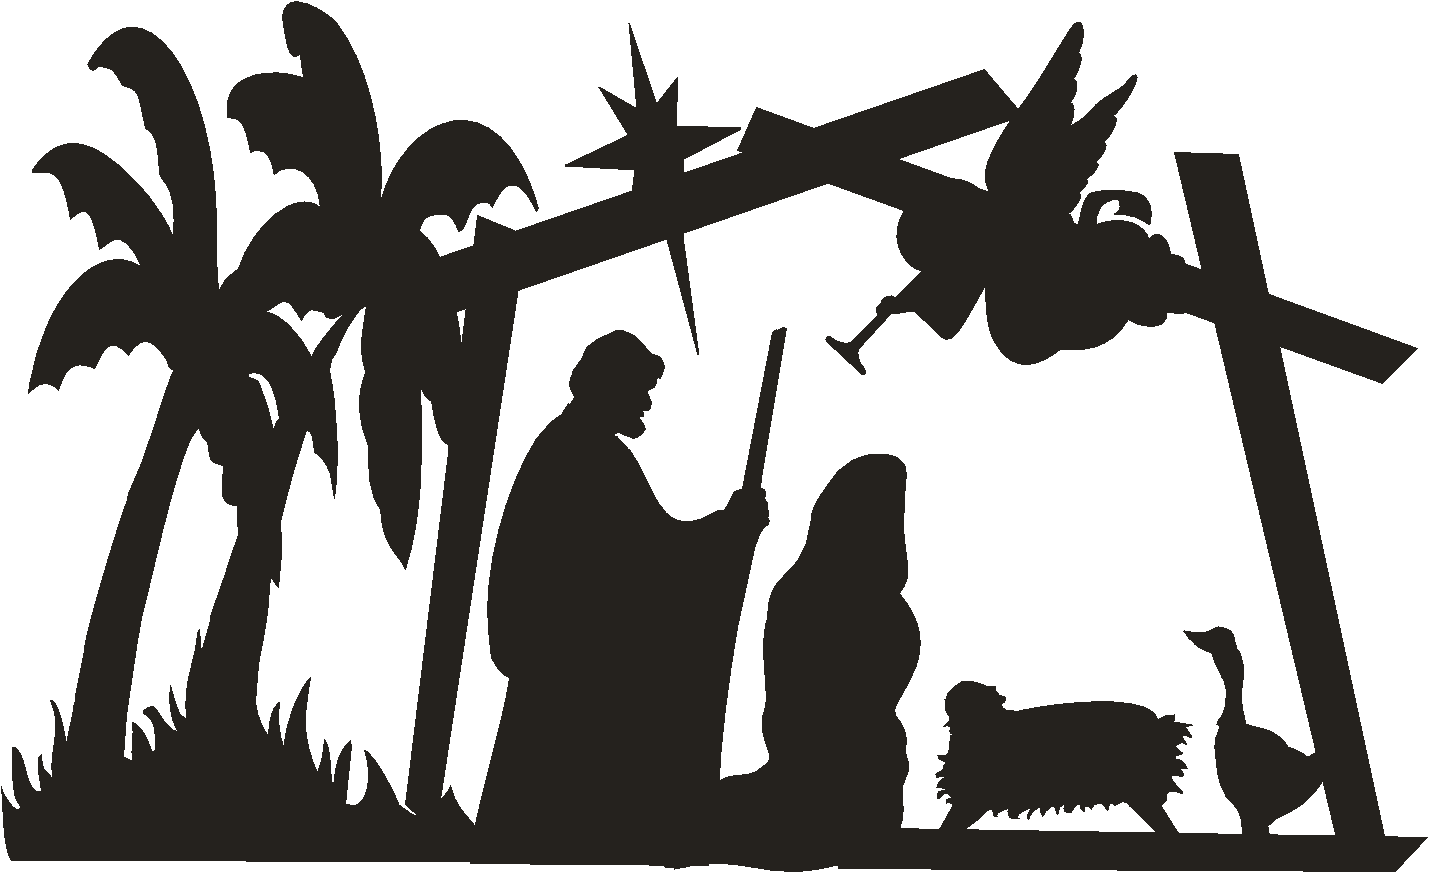 Nativity silhouette patterns clipart 2